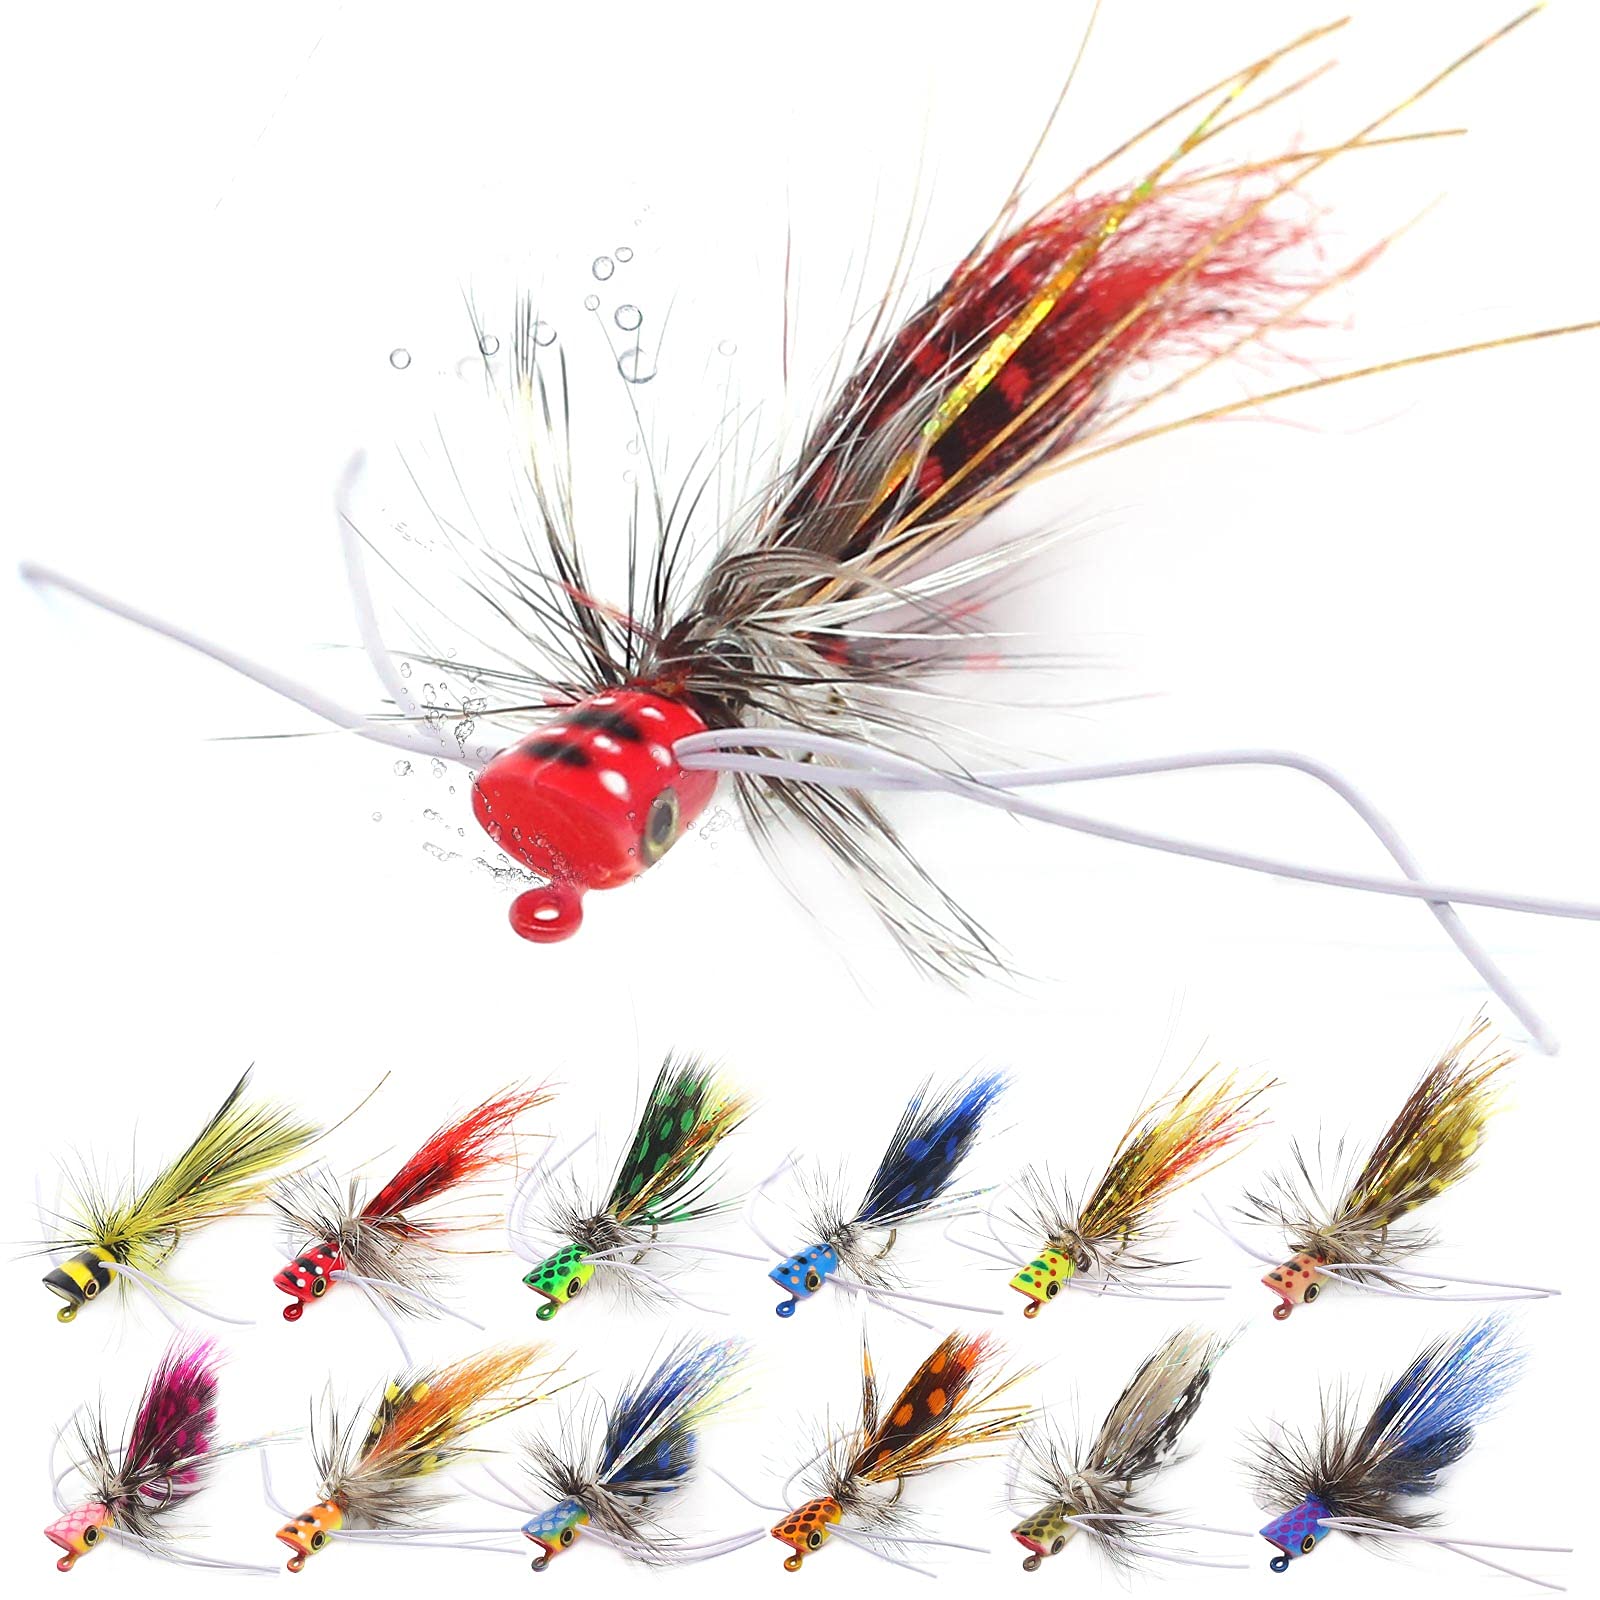 Popper-Flies-for-Fly-Fishing-Topwater-Panfish-Bluegill-Bass-Poppers Flies  Bugs Lures C-Small Poppers-12pcs